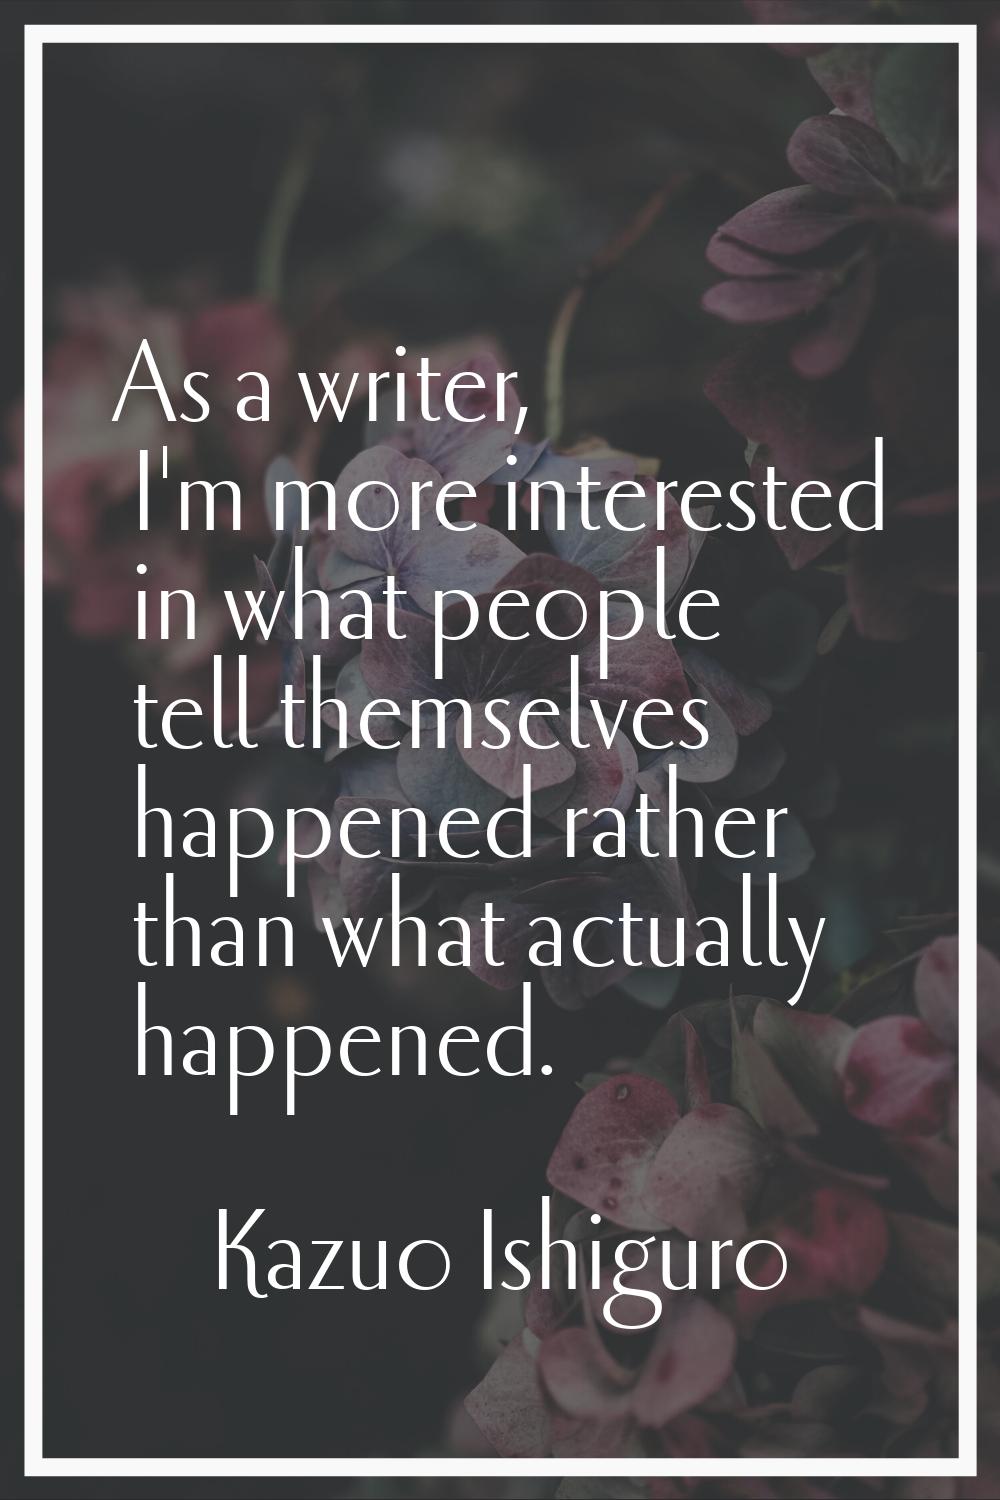 As a writer, I'm more interested in what people tell themselves happened rather than what actually 